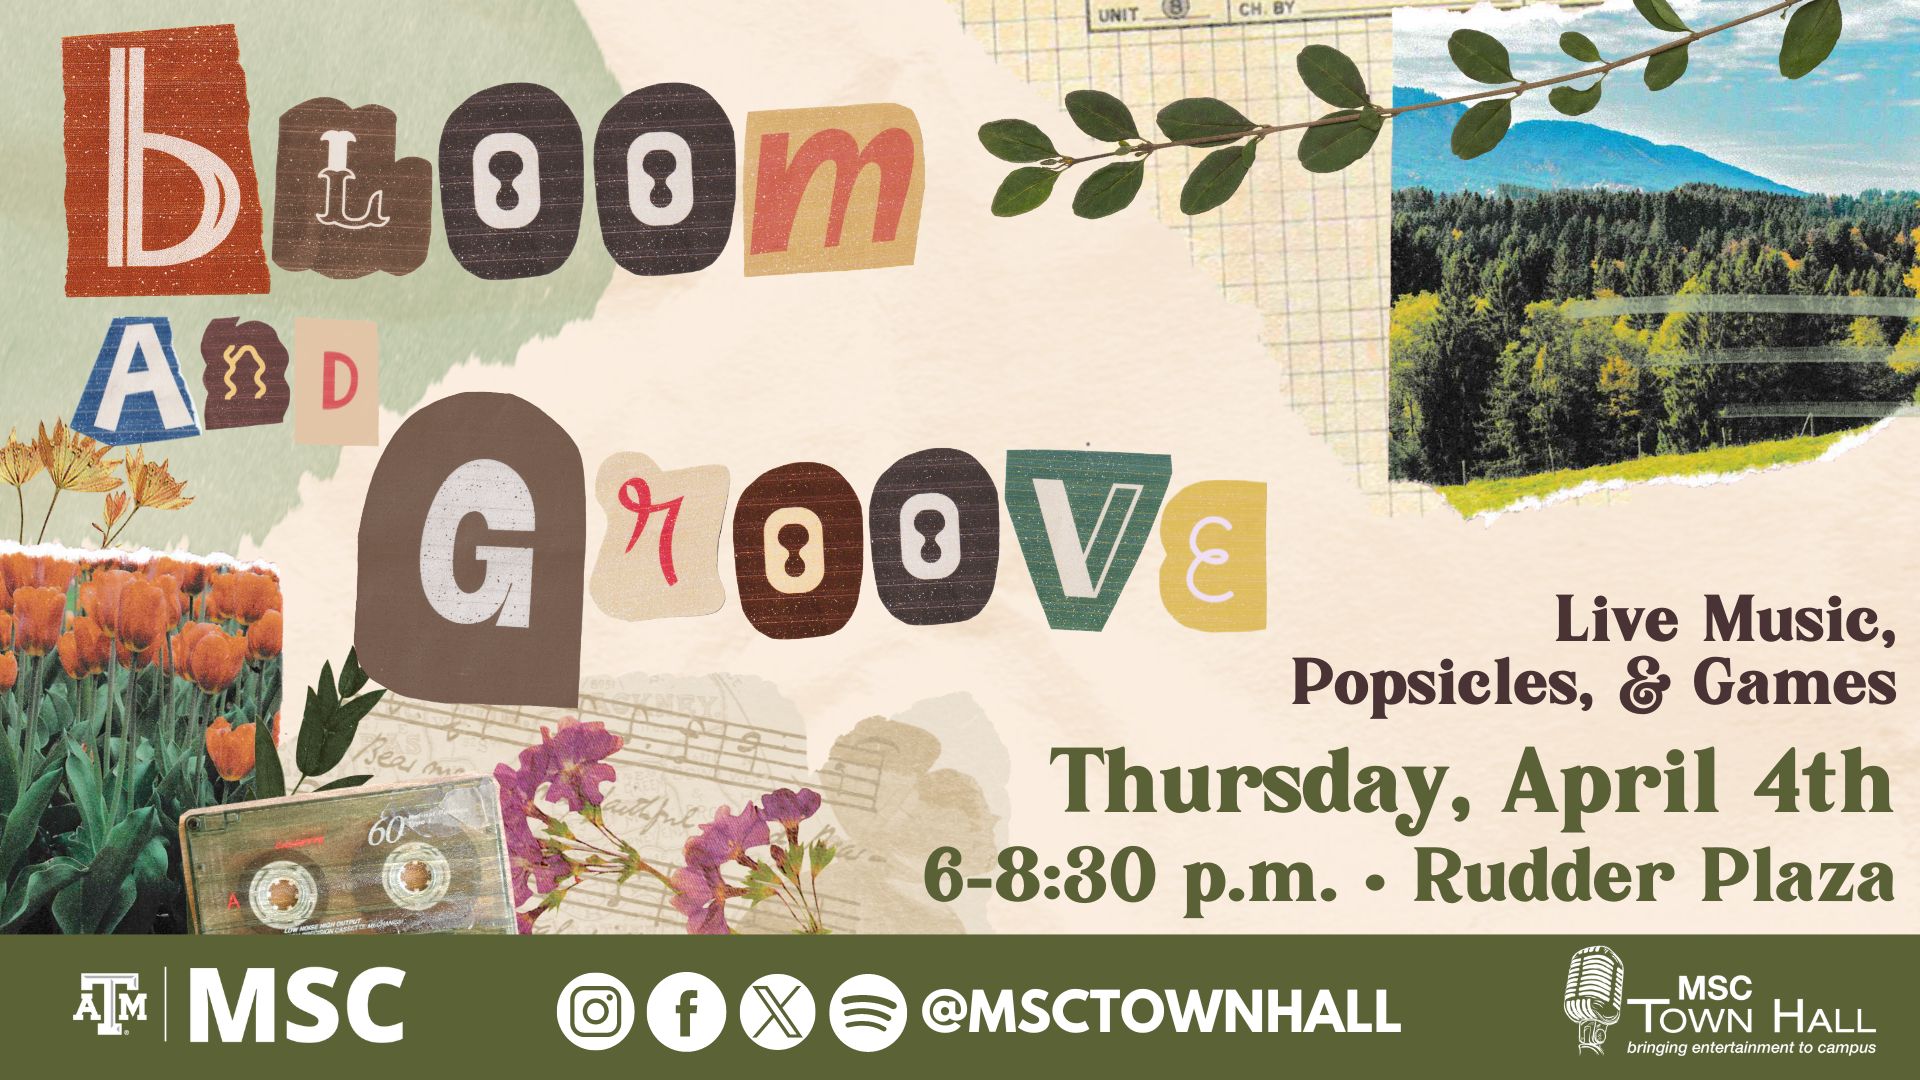 Bloom and Groove presented by MSC Town Hall, live music, popsicles and games. Thursday, April 4th, from 6 to 8:30 p.m., at Rudder Plaza. Instagram , Facebook, X, Spotify @msctownhall